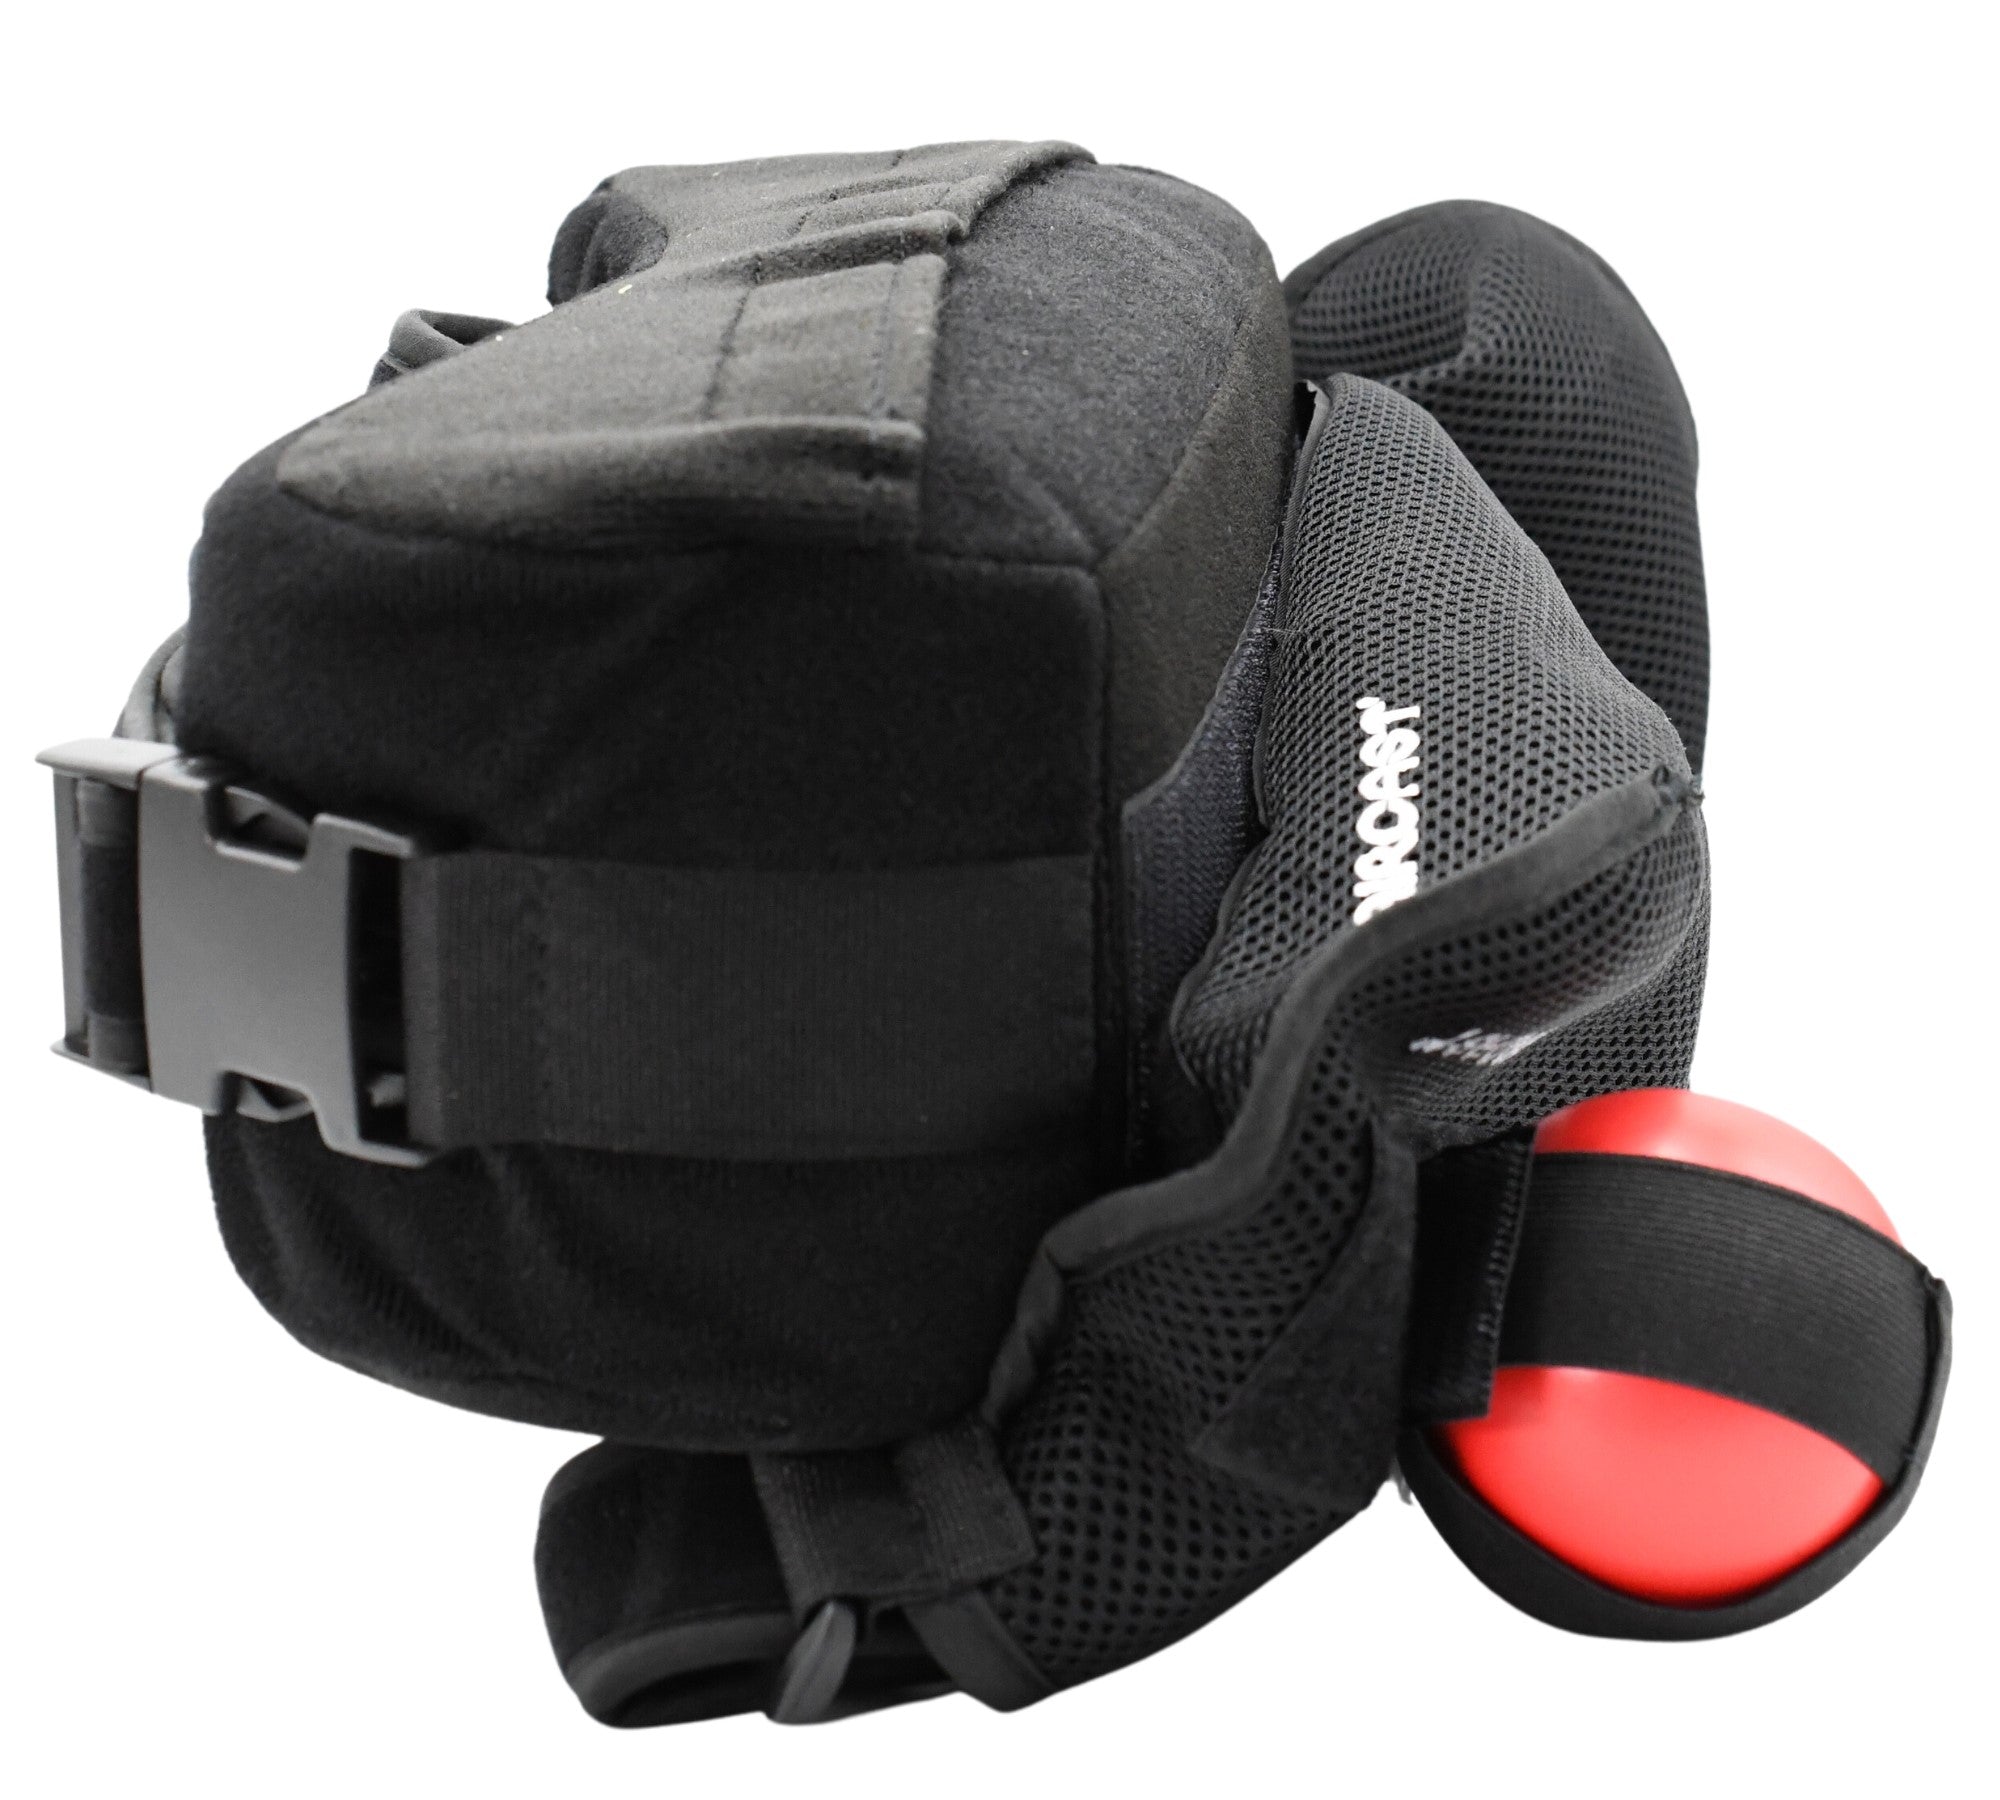 DJO AIRCAST® Quick-Fit Universal Shoulder Immobilizer w/Abduction Pillow & Foam Excercise Ball. One Size Fits Most – Left or Right Shoulder.